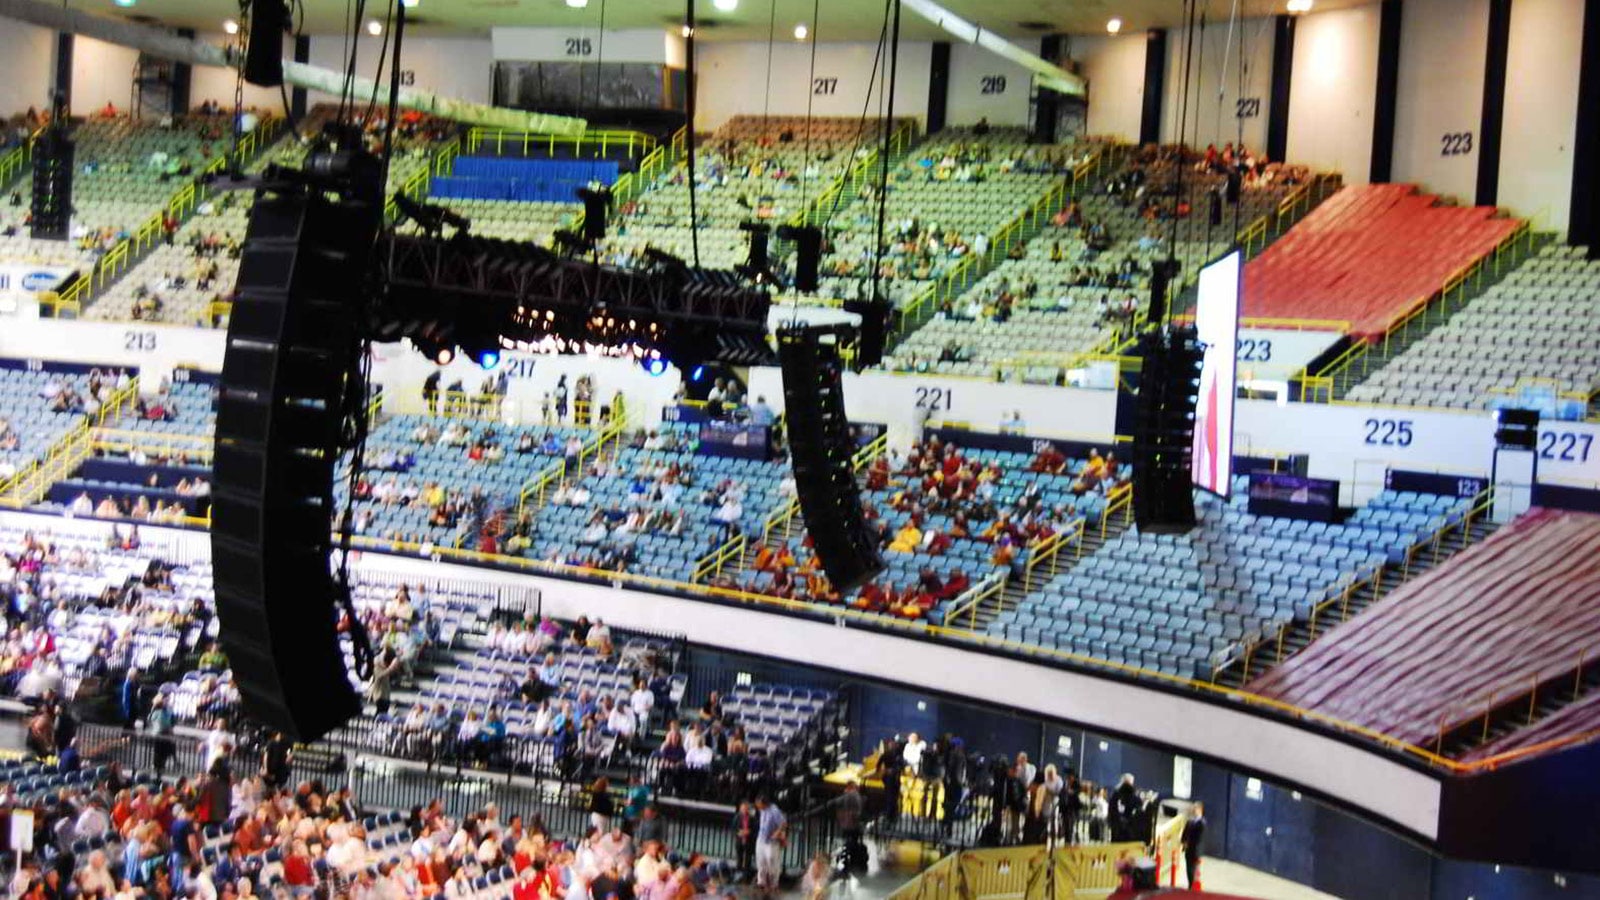 PRG Selects Meyer Sound System for Dalai Lama's Address at Long Beach Arena